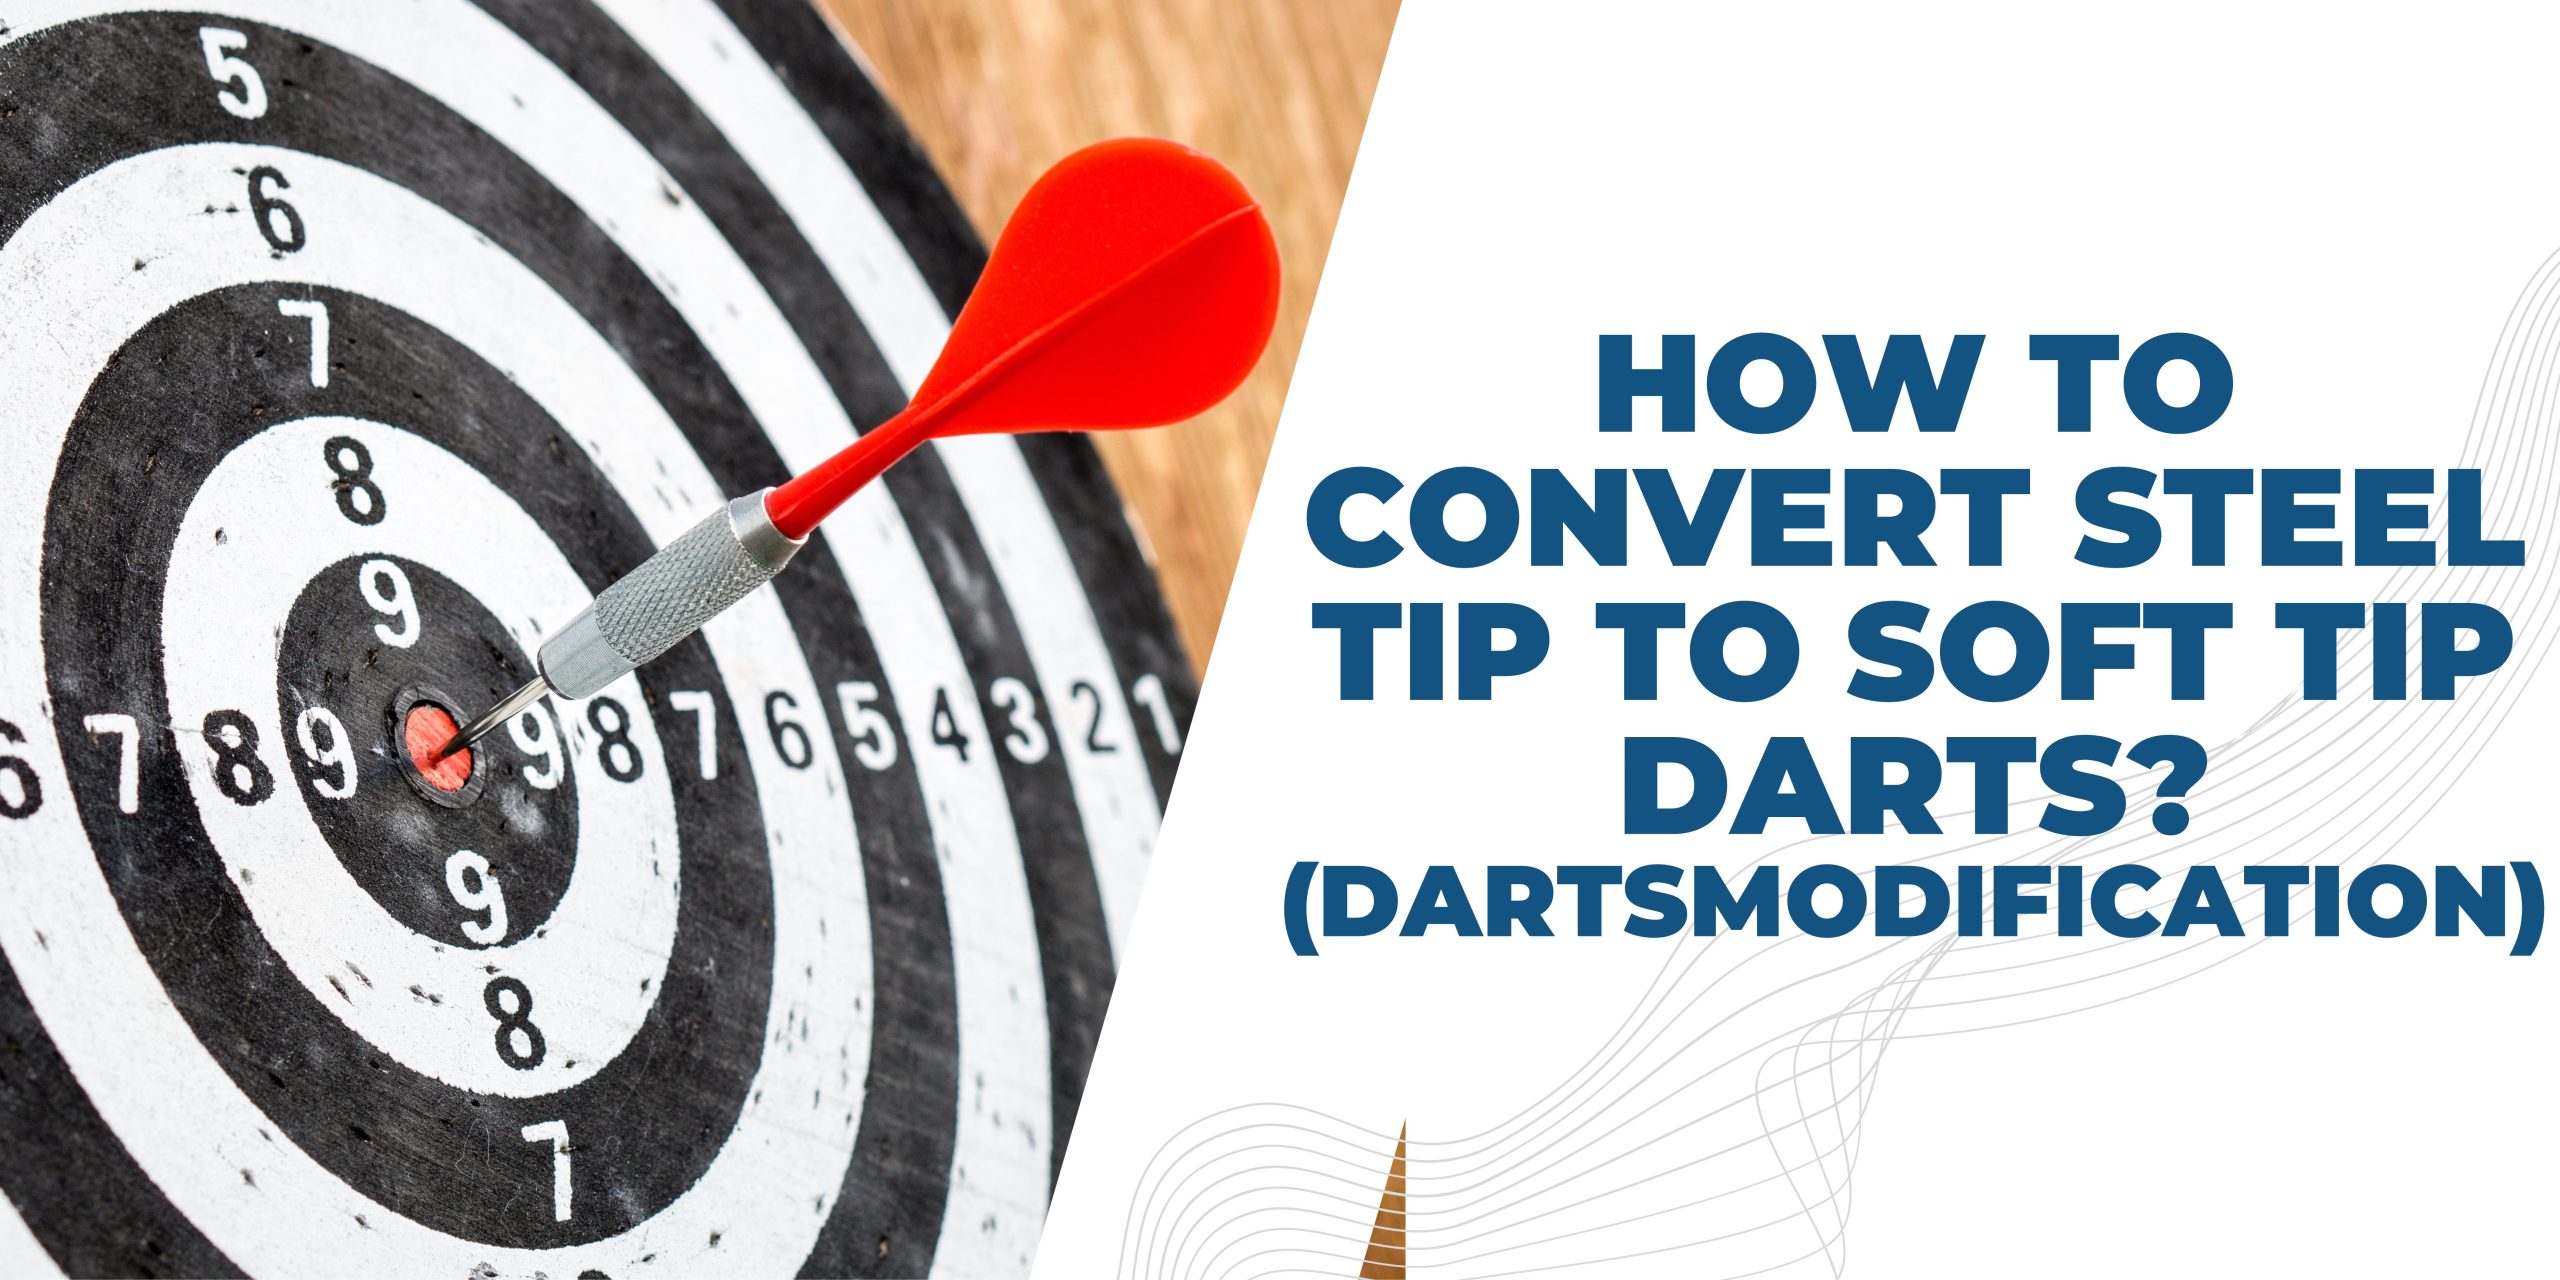 How to convert steel tip to soft tip darts